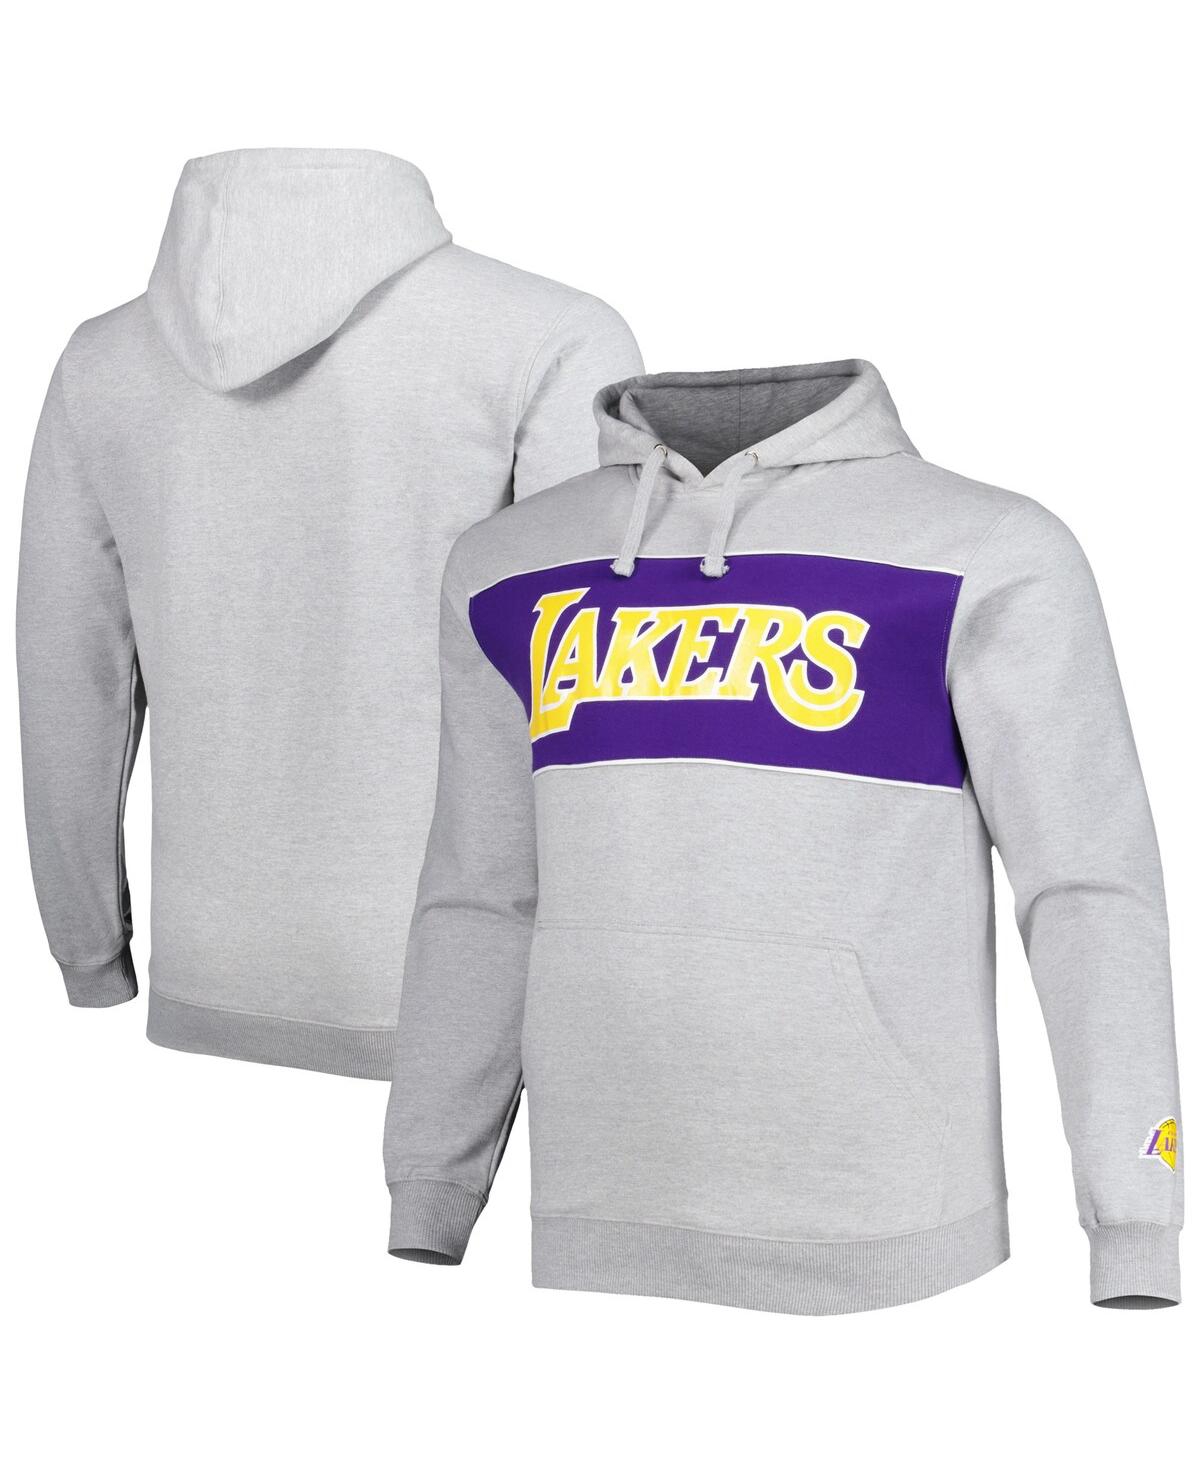 Shop Fanatics Men's  Heather Gray Los Angeles Lakers Big And Tall Wordmark Pullover Hoodie